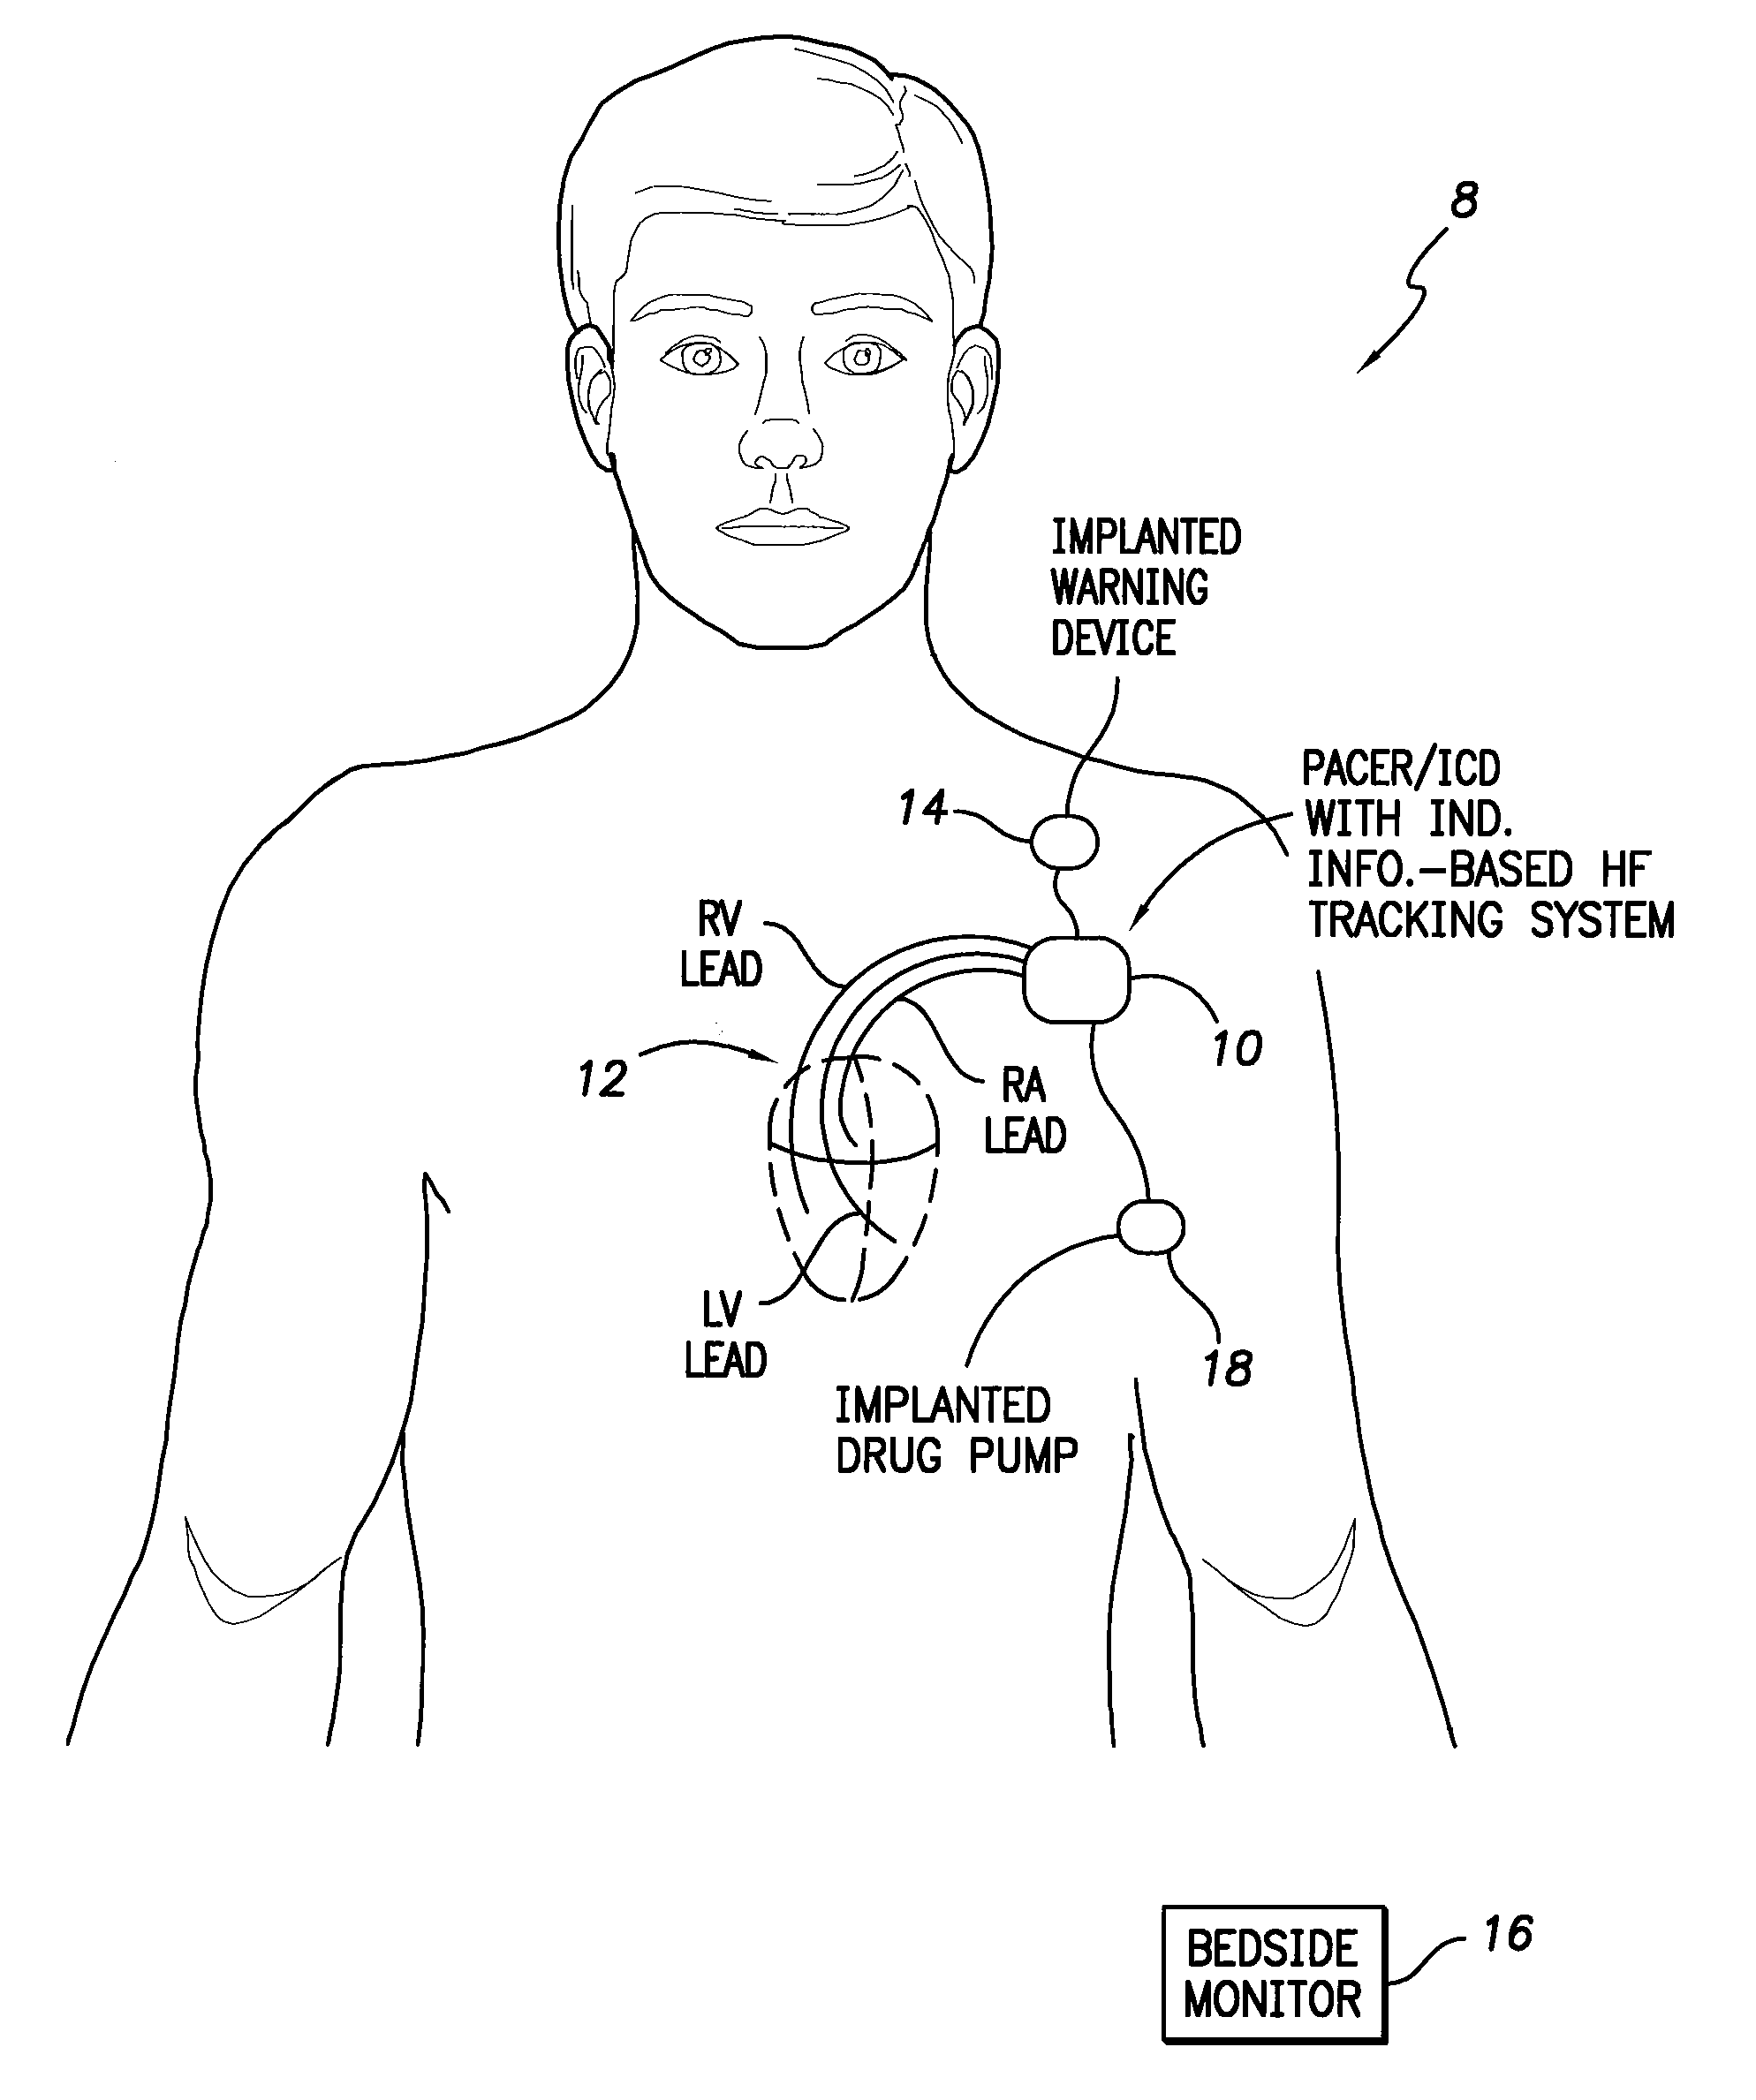 Systems and methods for use by an implantable medical device for detecting heart failure based on the independent information content of immittance vectors